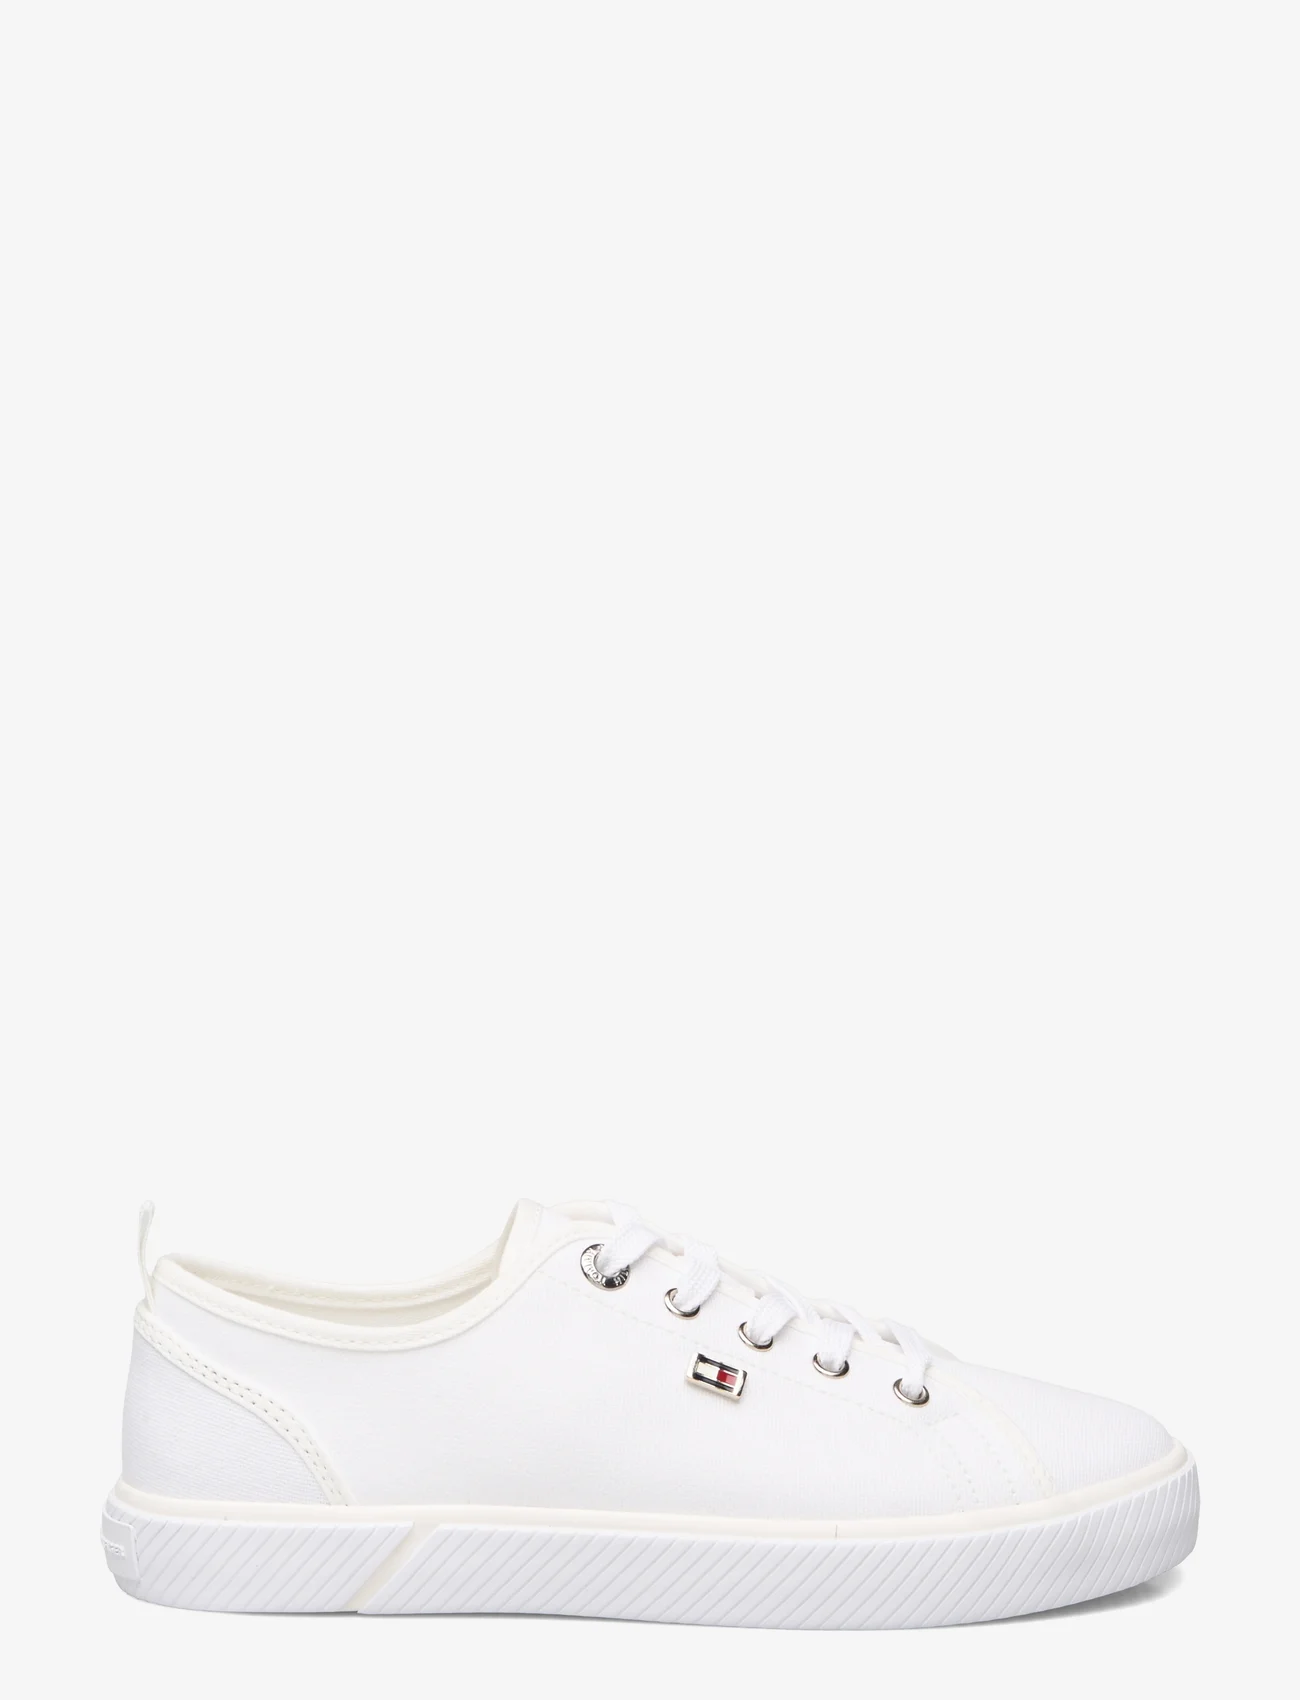 Tommy Hilfiger - VULC CANVAS SNEAKER - lage sneakers - white - 1